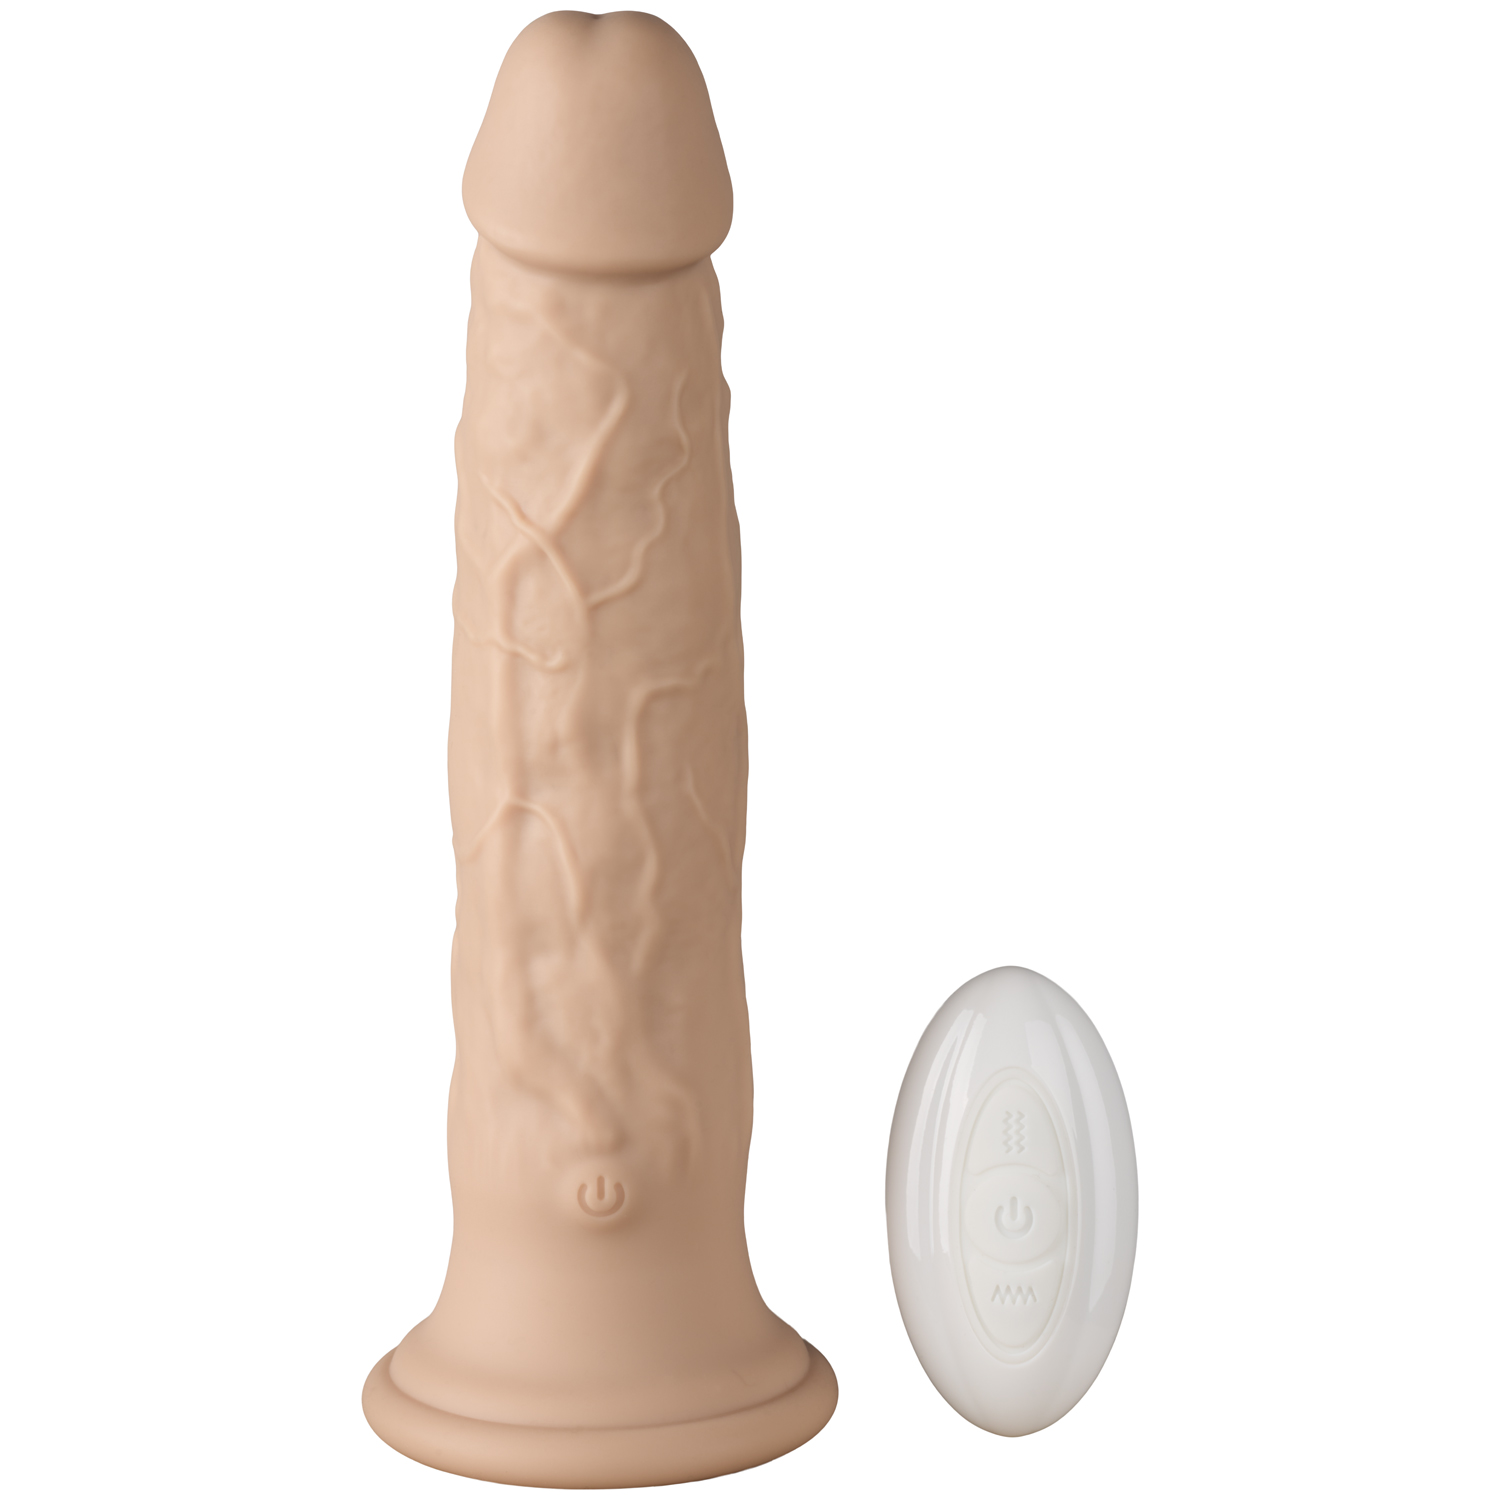 Willy City Rotating Beads Vibrerende Dildo 23 cm - Nude